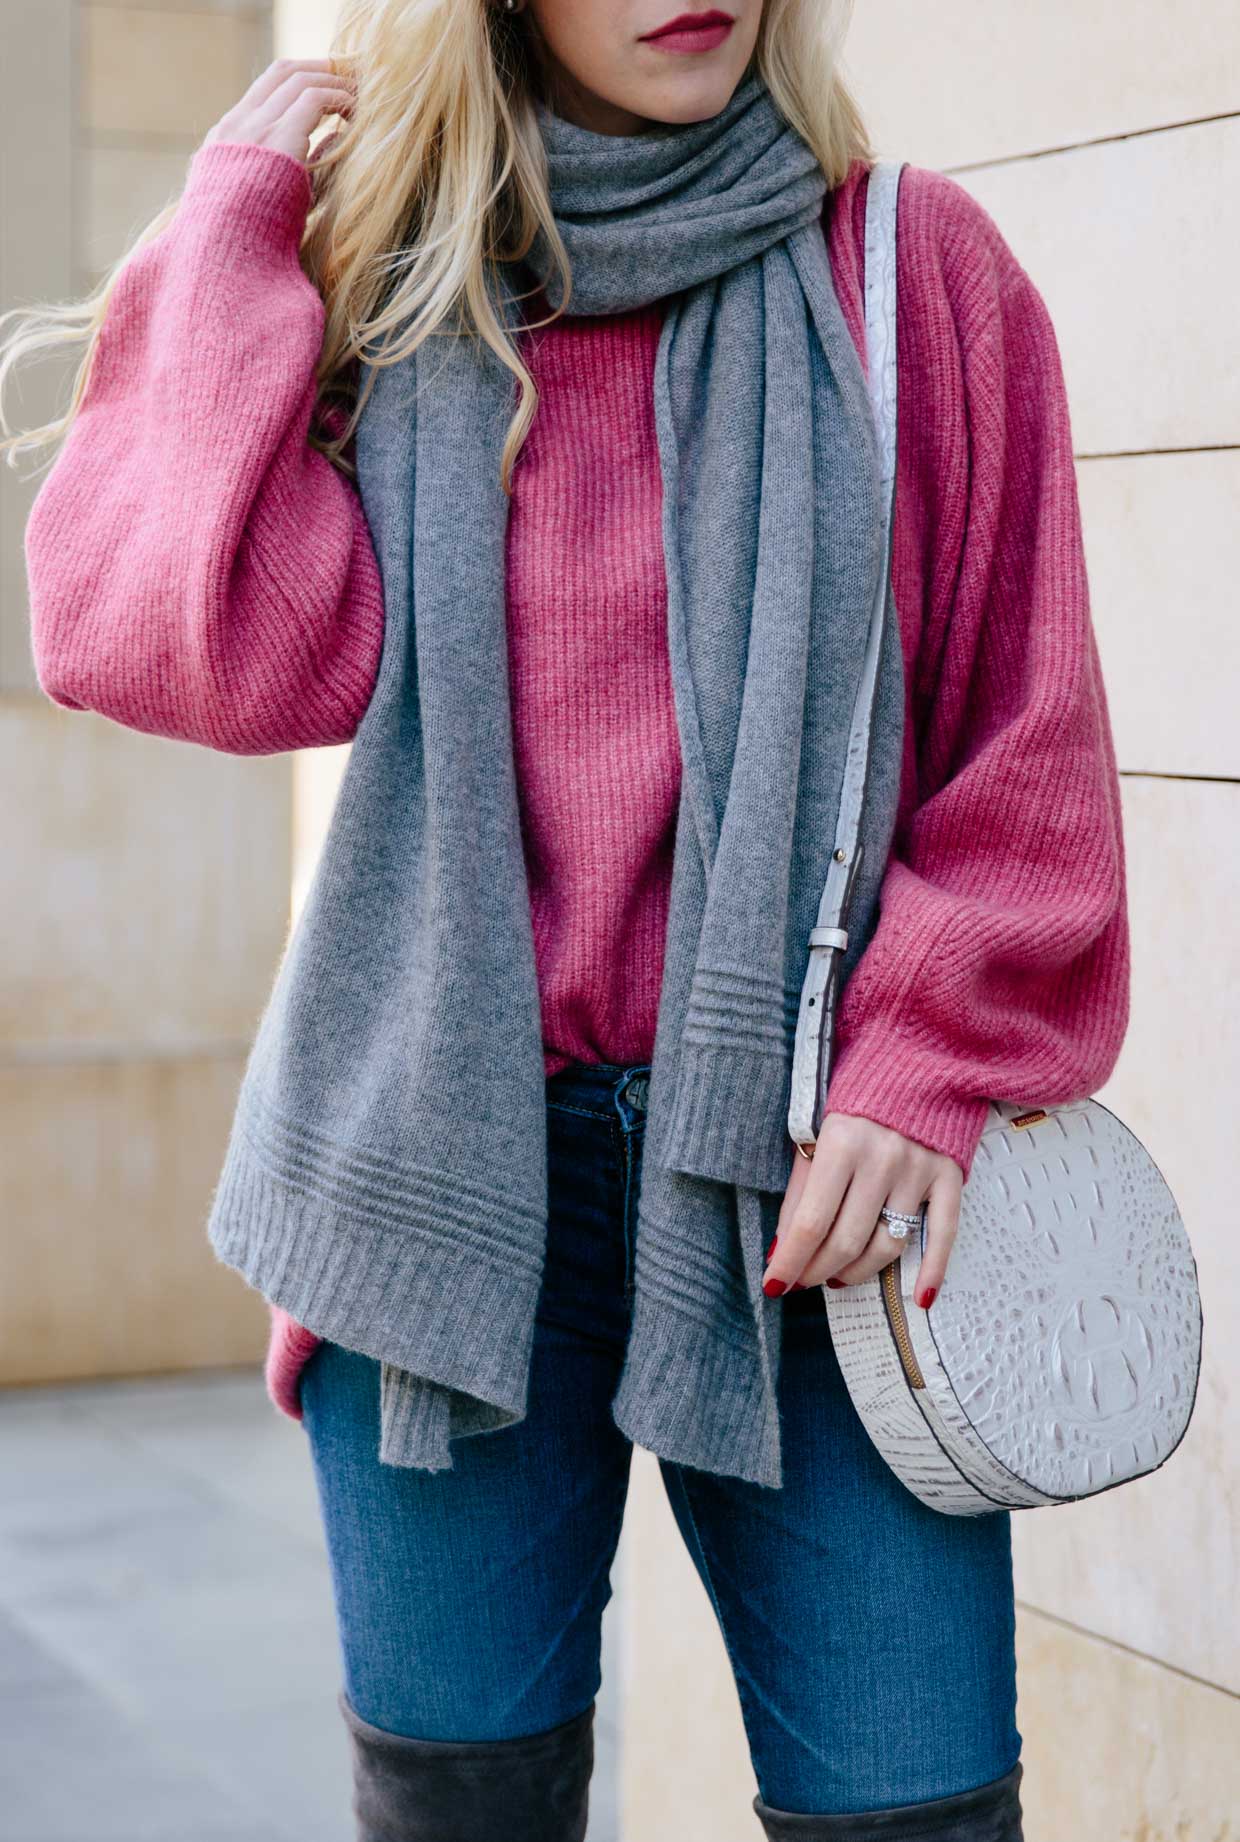 The Perfect Pink Sweater for Valentine's Day - Meagan's Moda